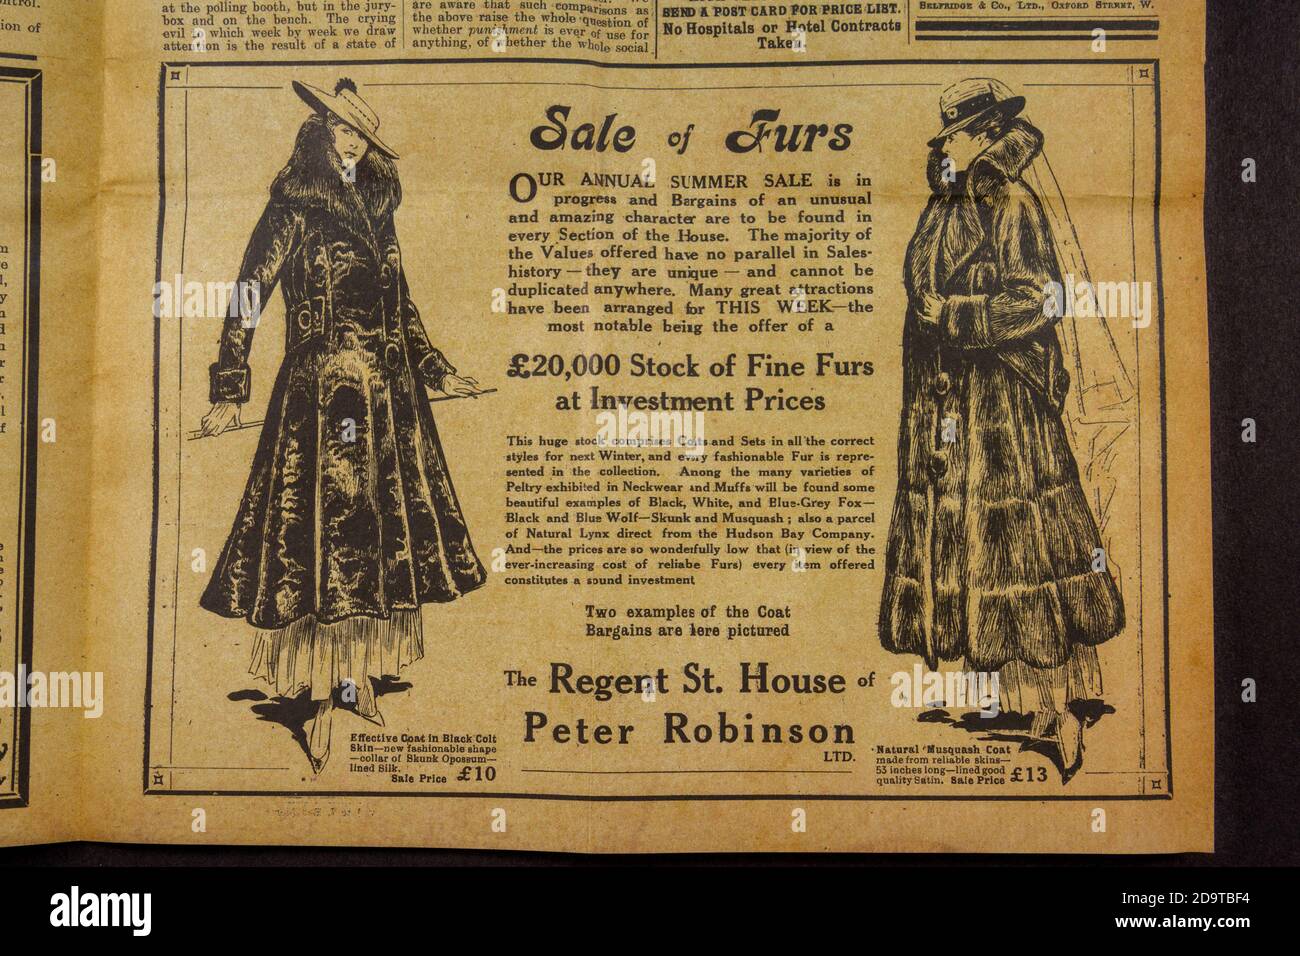 Advert for Regent St. House of Peter Robinson, 'Votes For Women' magazine, 16th July 1915: replica memorabilia of the Suffragettes Movement, UK. Stock Photo